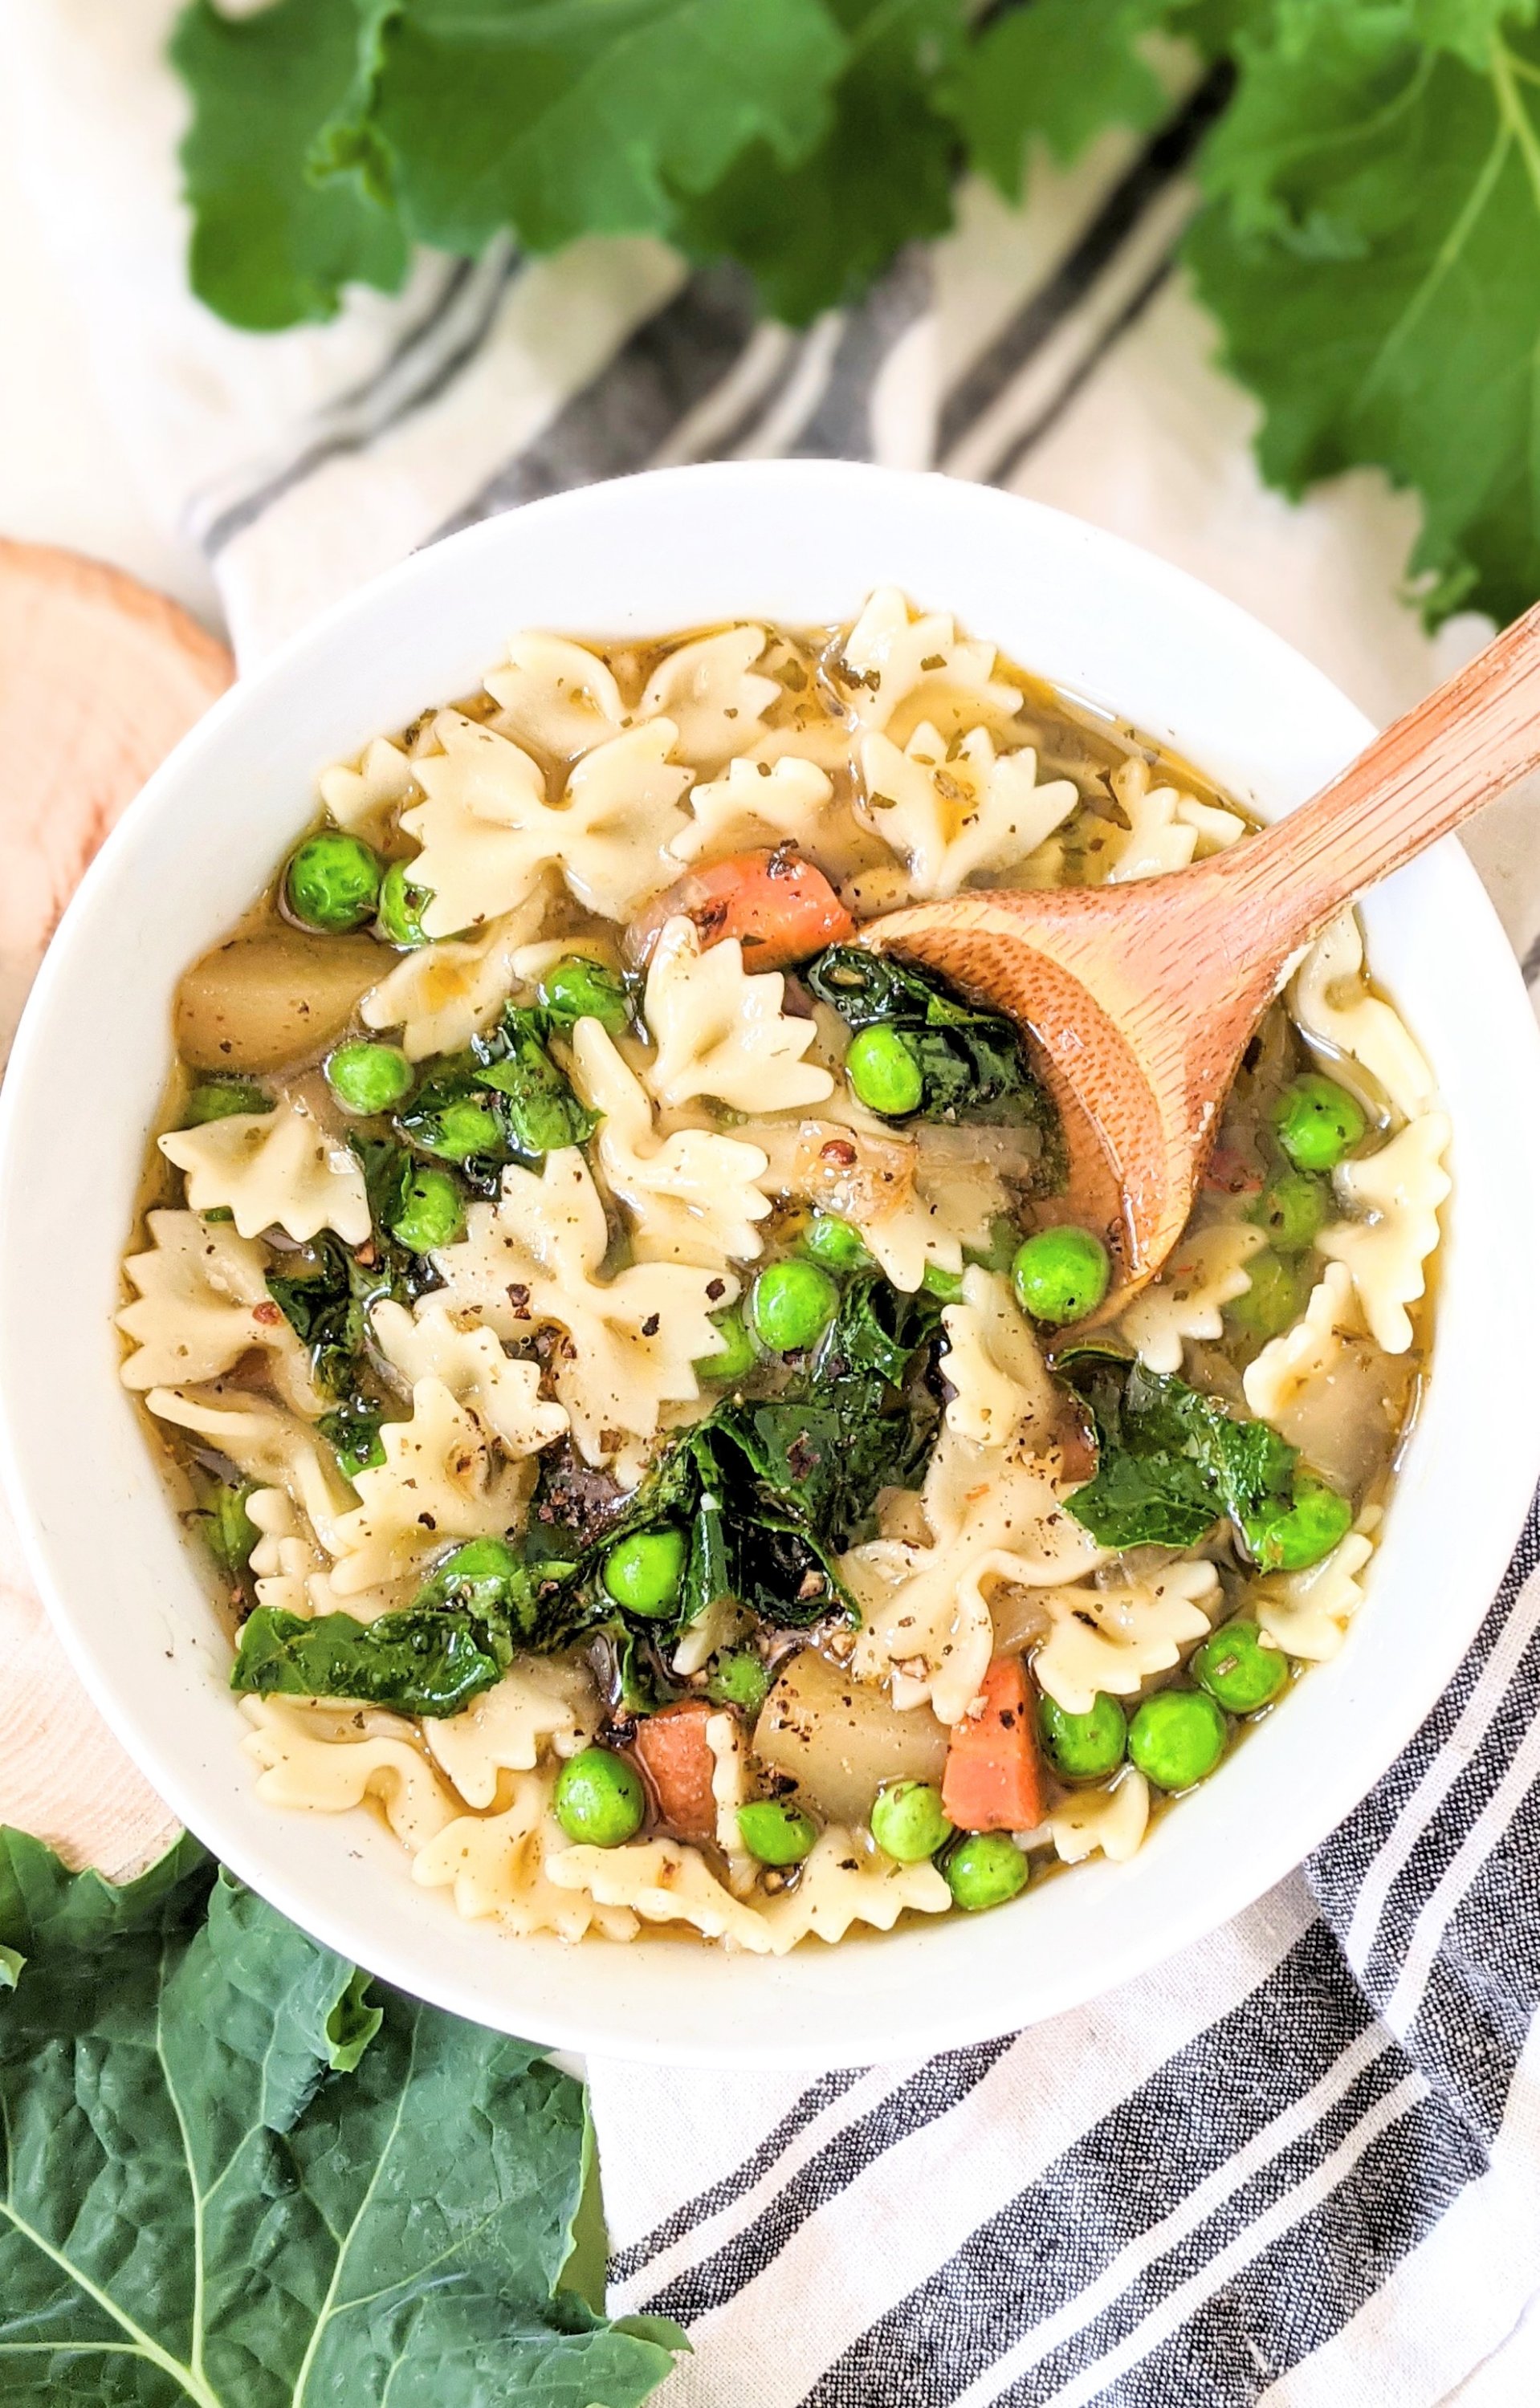 vegan spring minestrone with pesto soup recipe vegetarian spring recipes with spring vegetables healthy seasonal spring recipes for lunch or dinner vegan gluten free